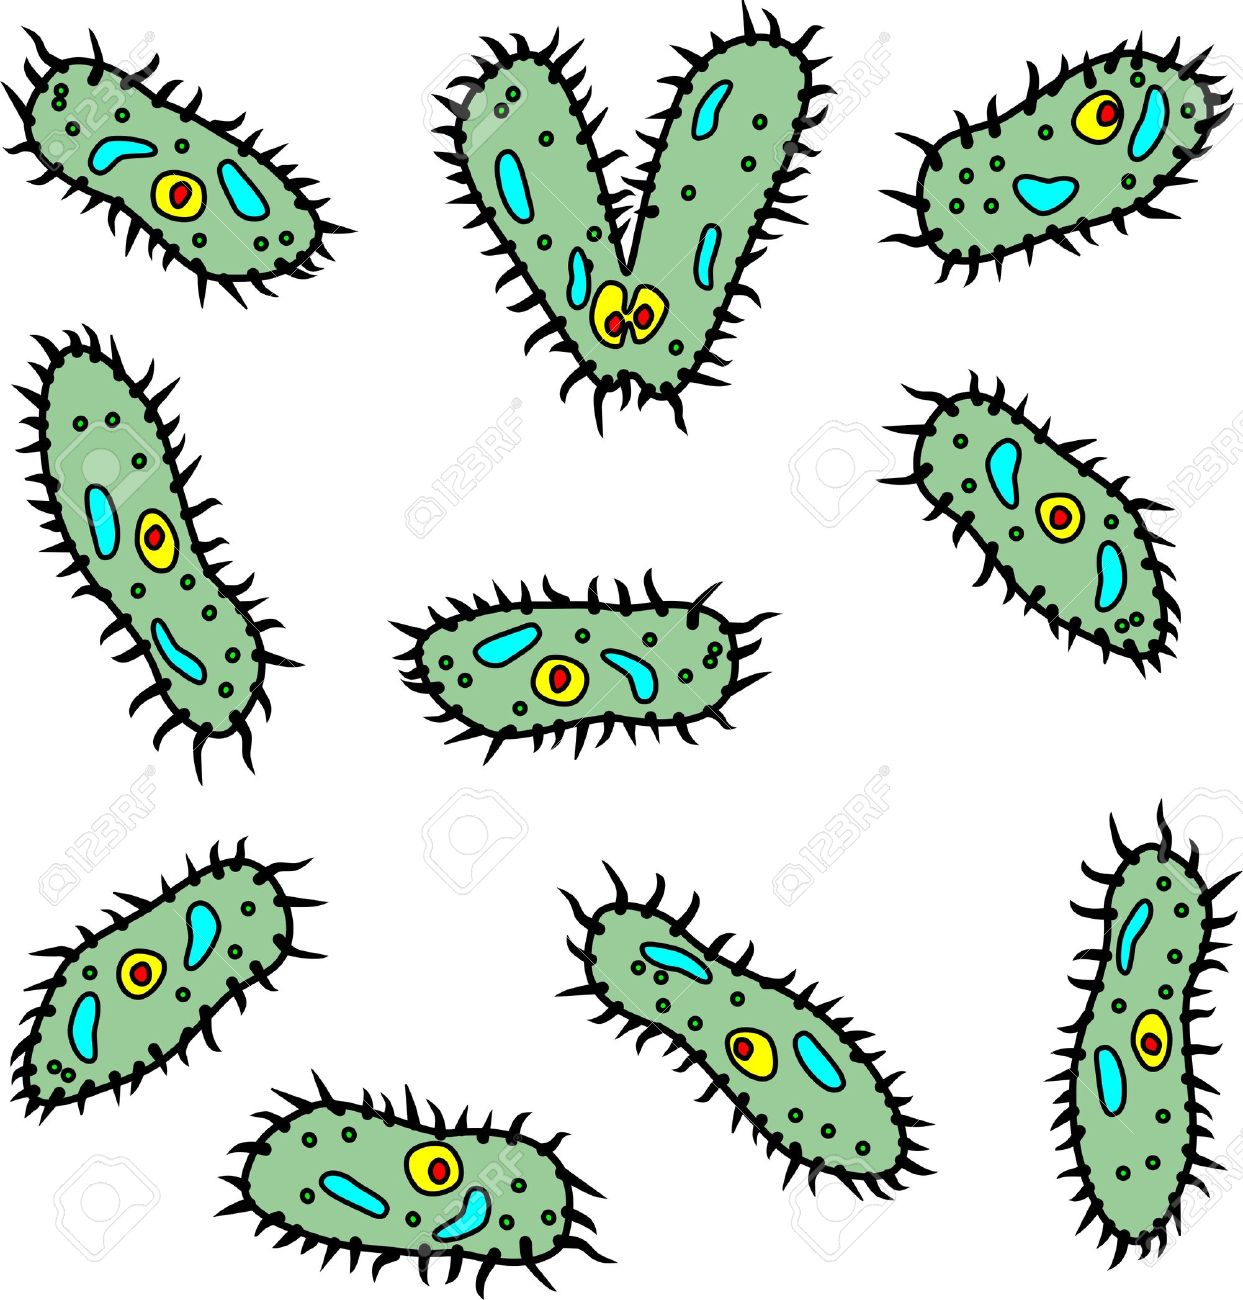 Pencil and in color. Bacteria clipart magnifying glass